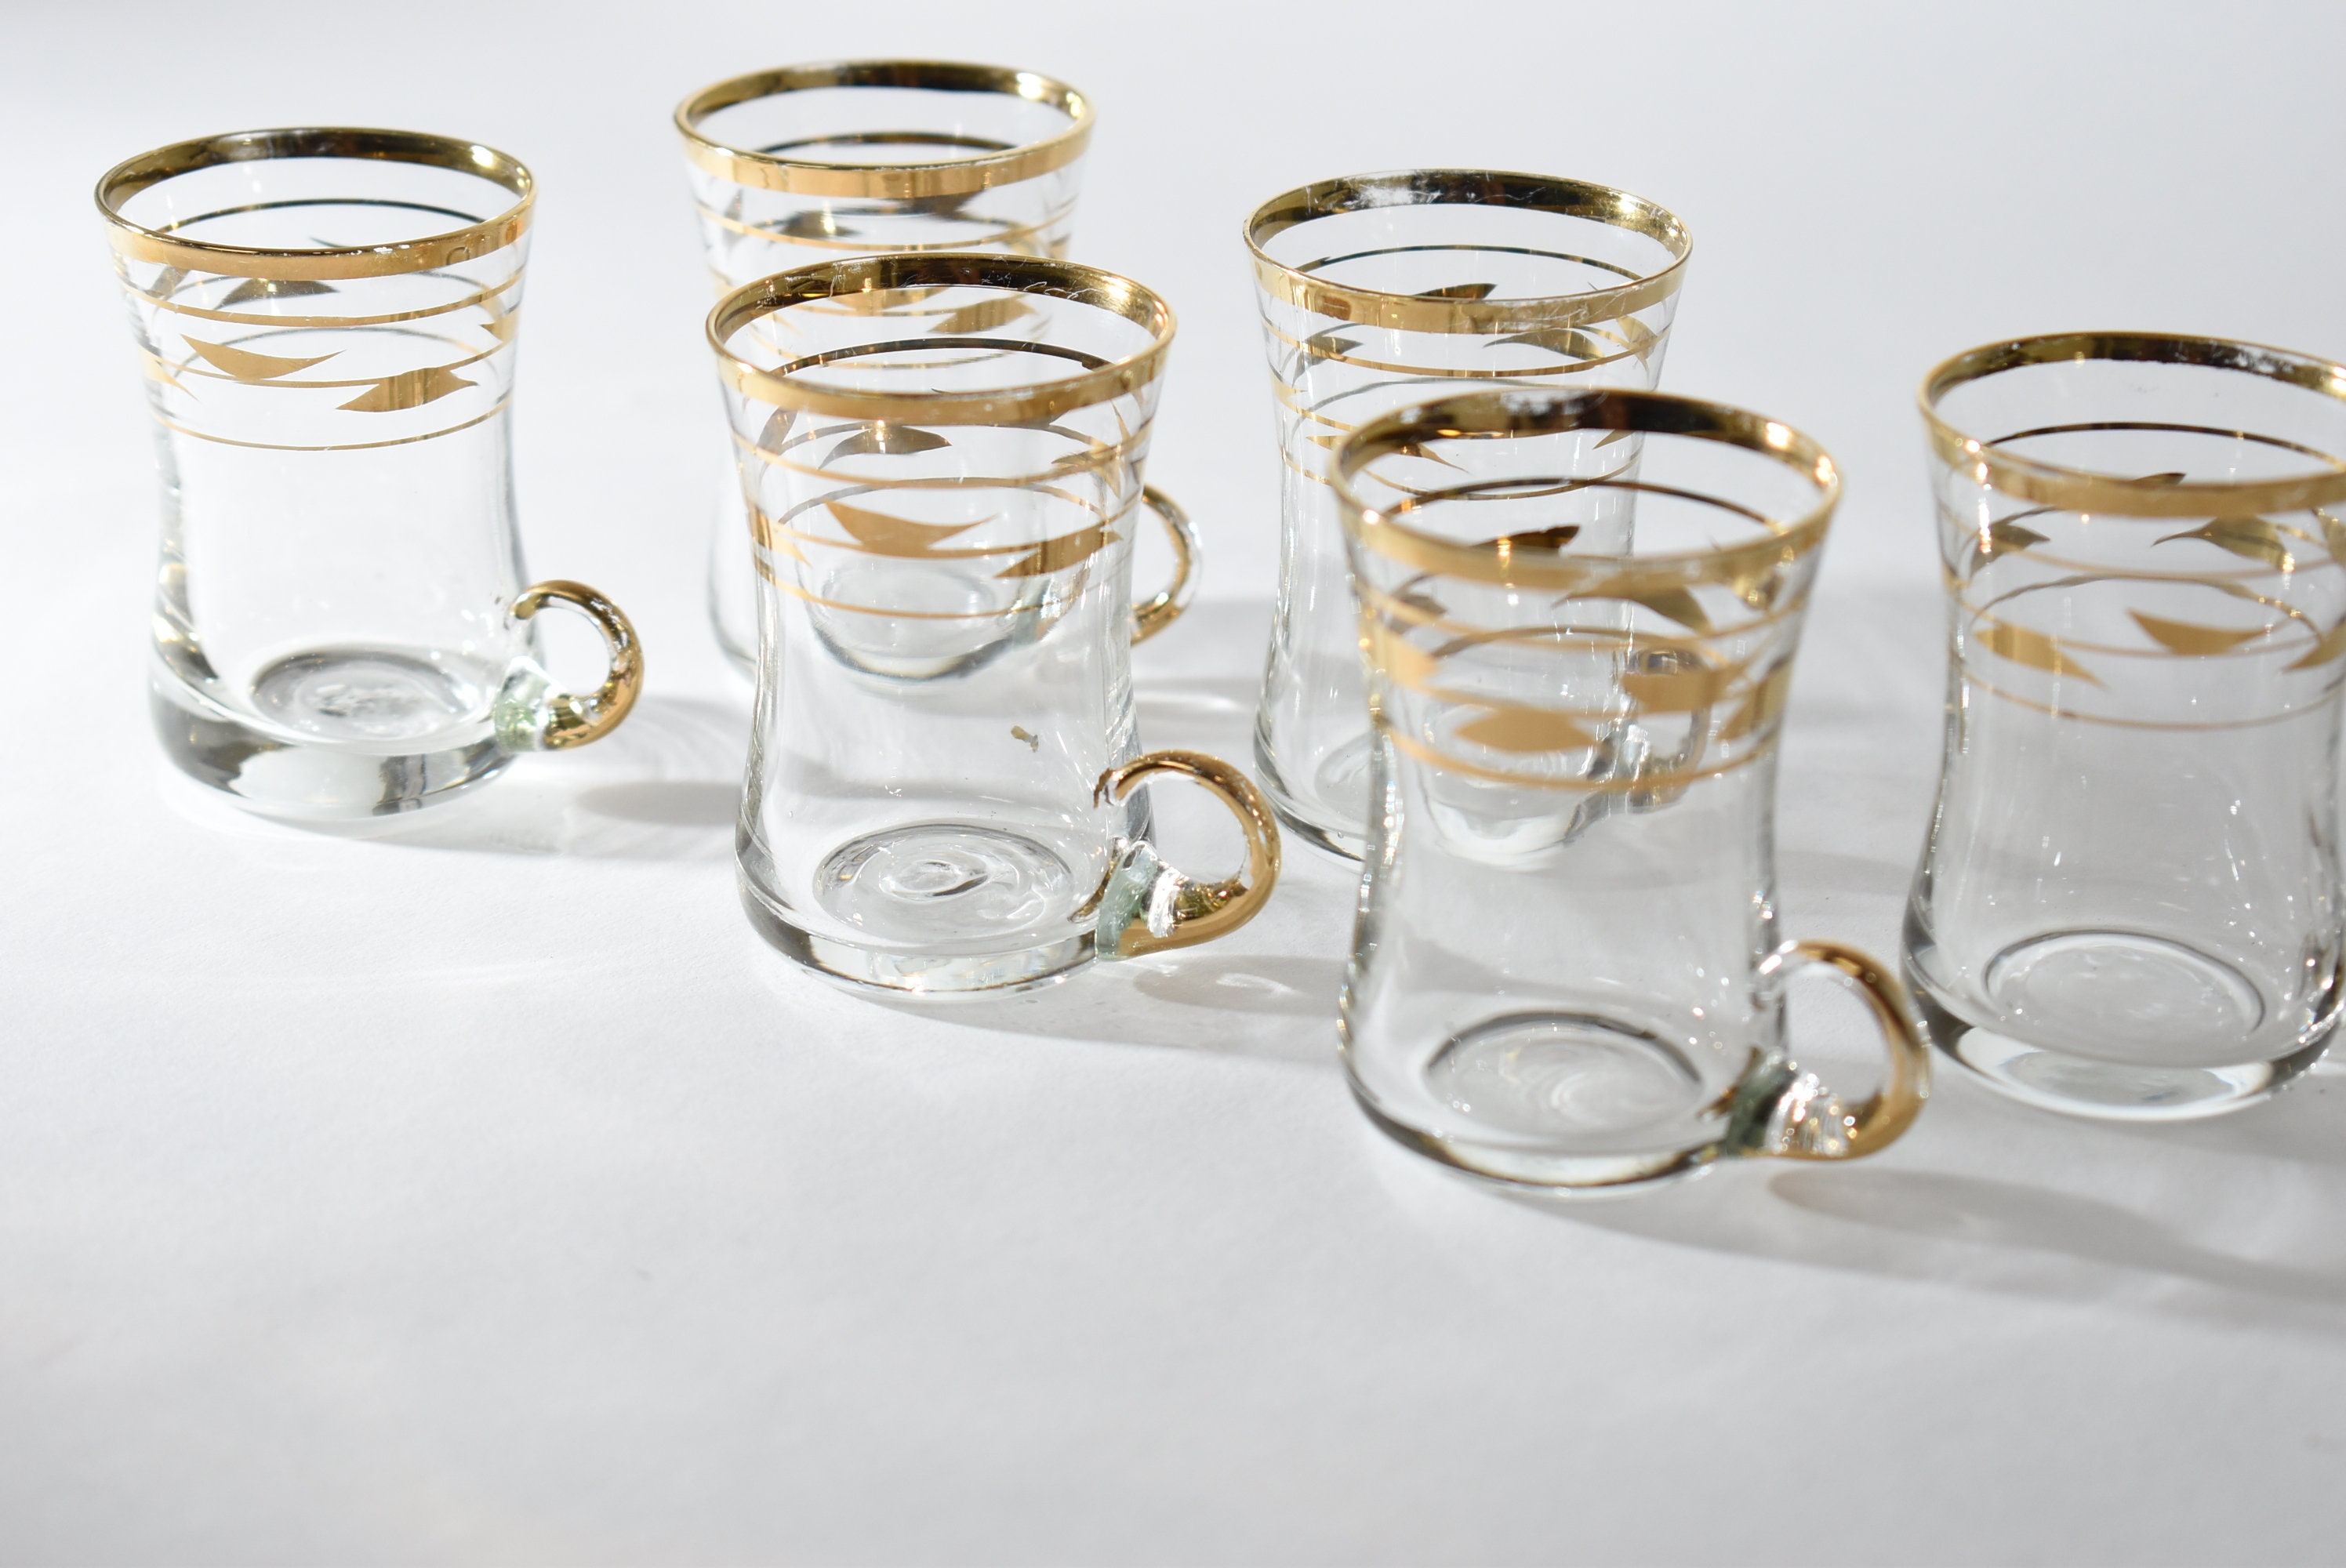 6 Mini Hot Toddy Glasses, Vintage Glassware Barware, Retro Glasses,  Aperitif Glasses, Vintage Shot Glasses, Before Dinner Drinks Gold